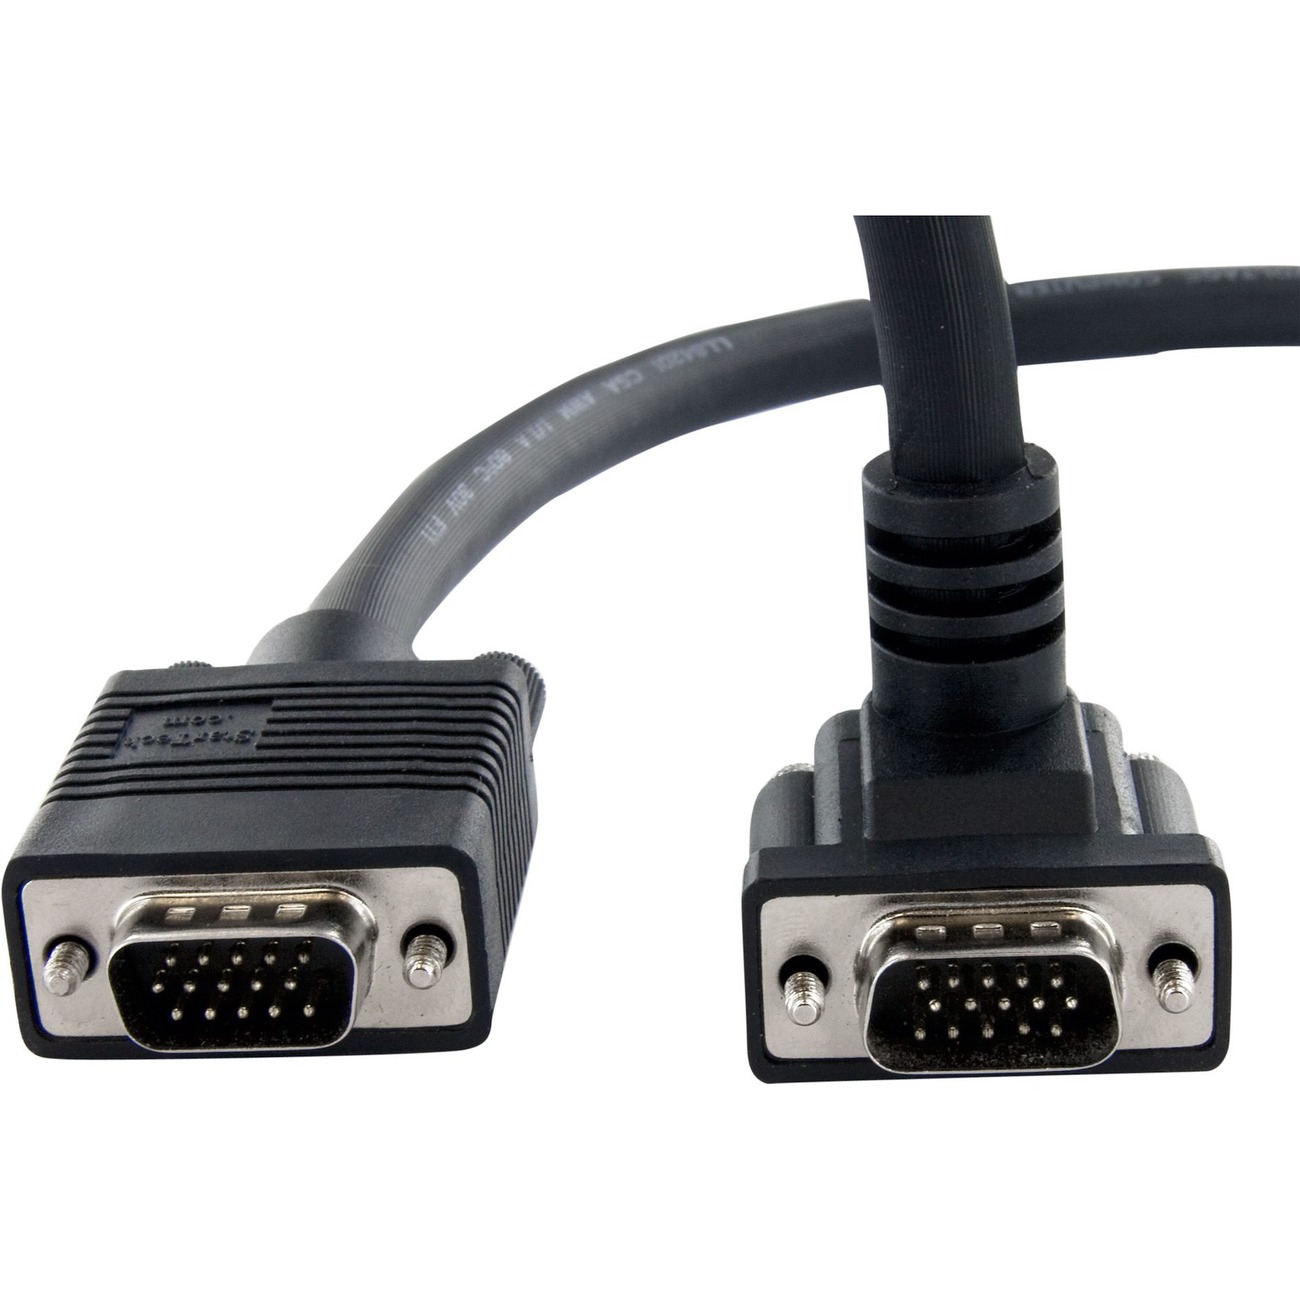 VGA HD Male to Male M/M 15Pin Extension Cable Cord 6ft 10ft 15ft 20ft 25ft 30ft